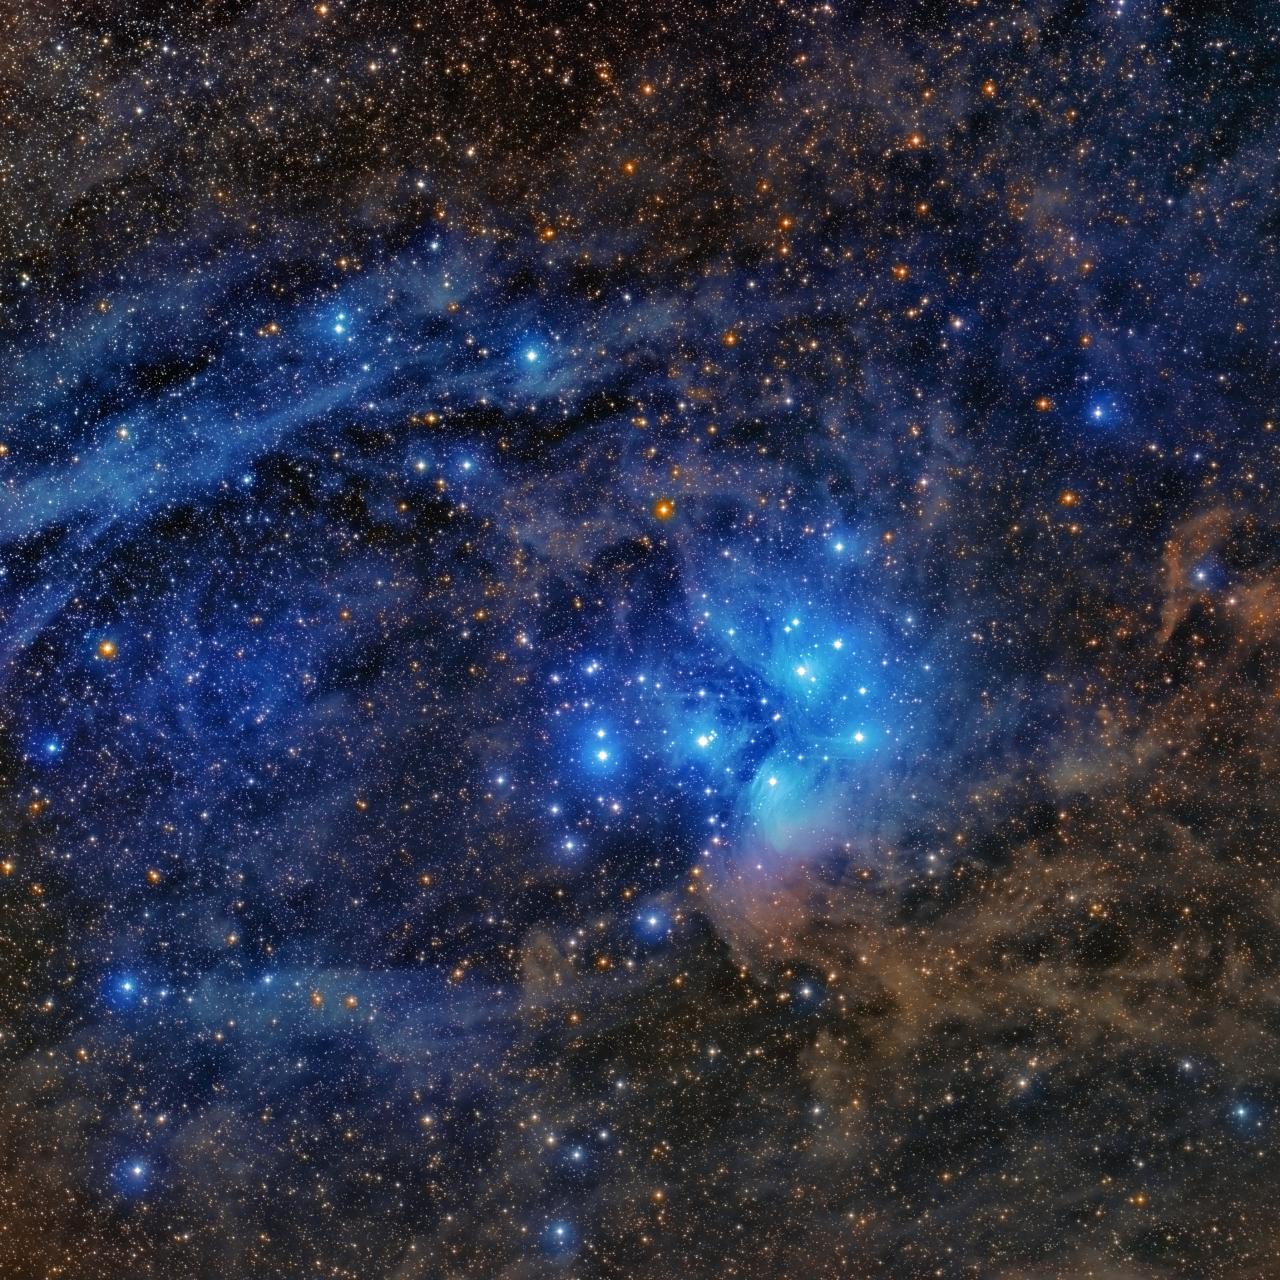 Pleiades Open Cluster (M45)